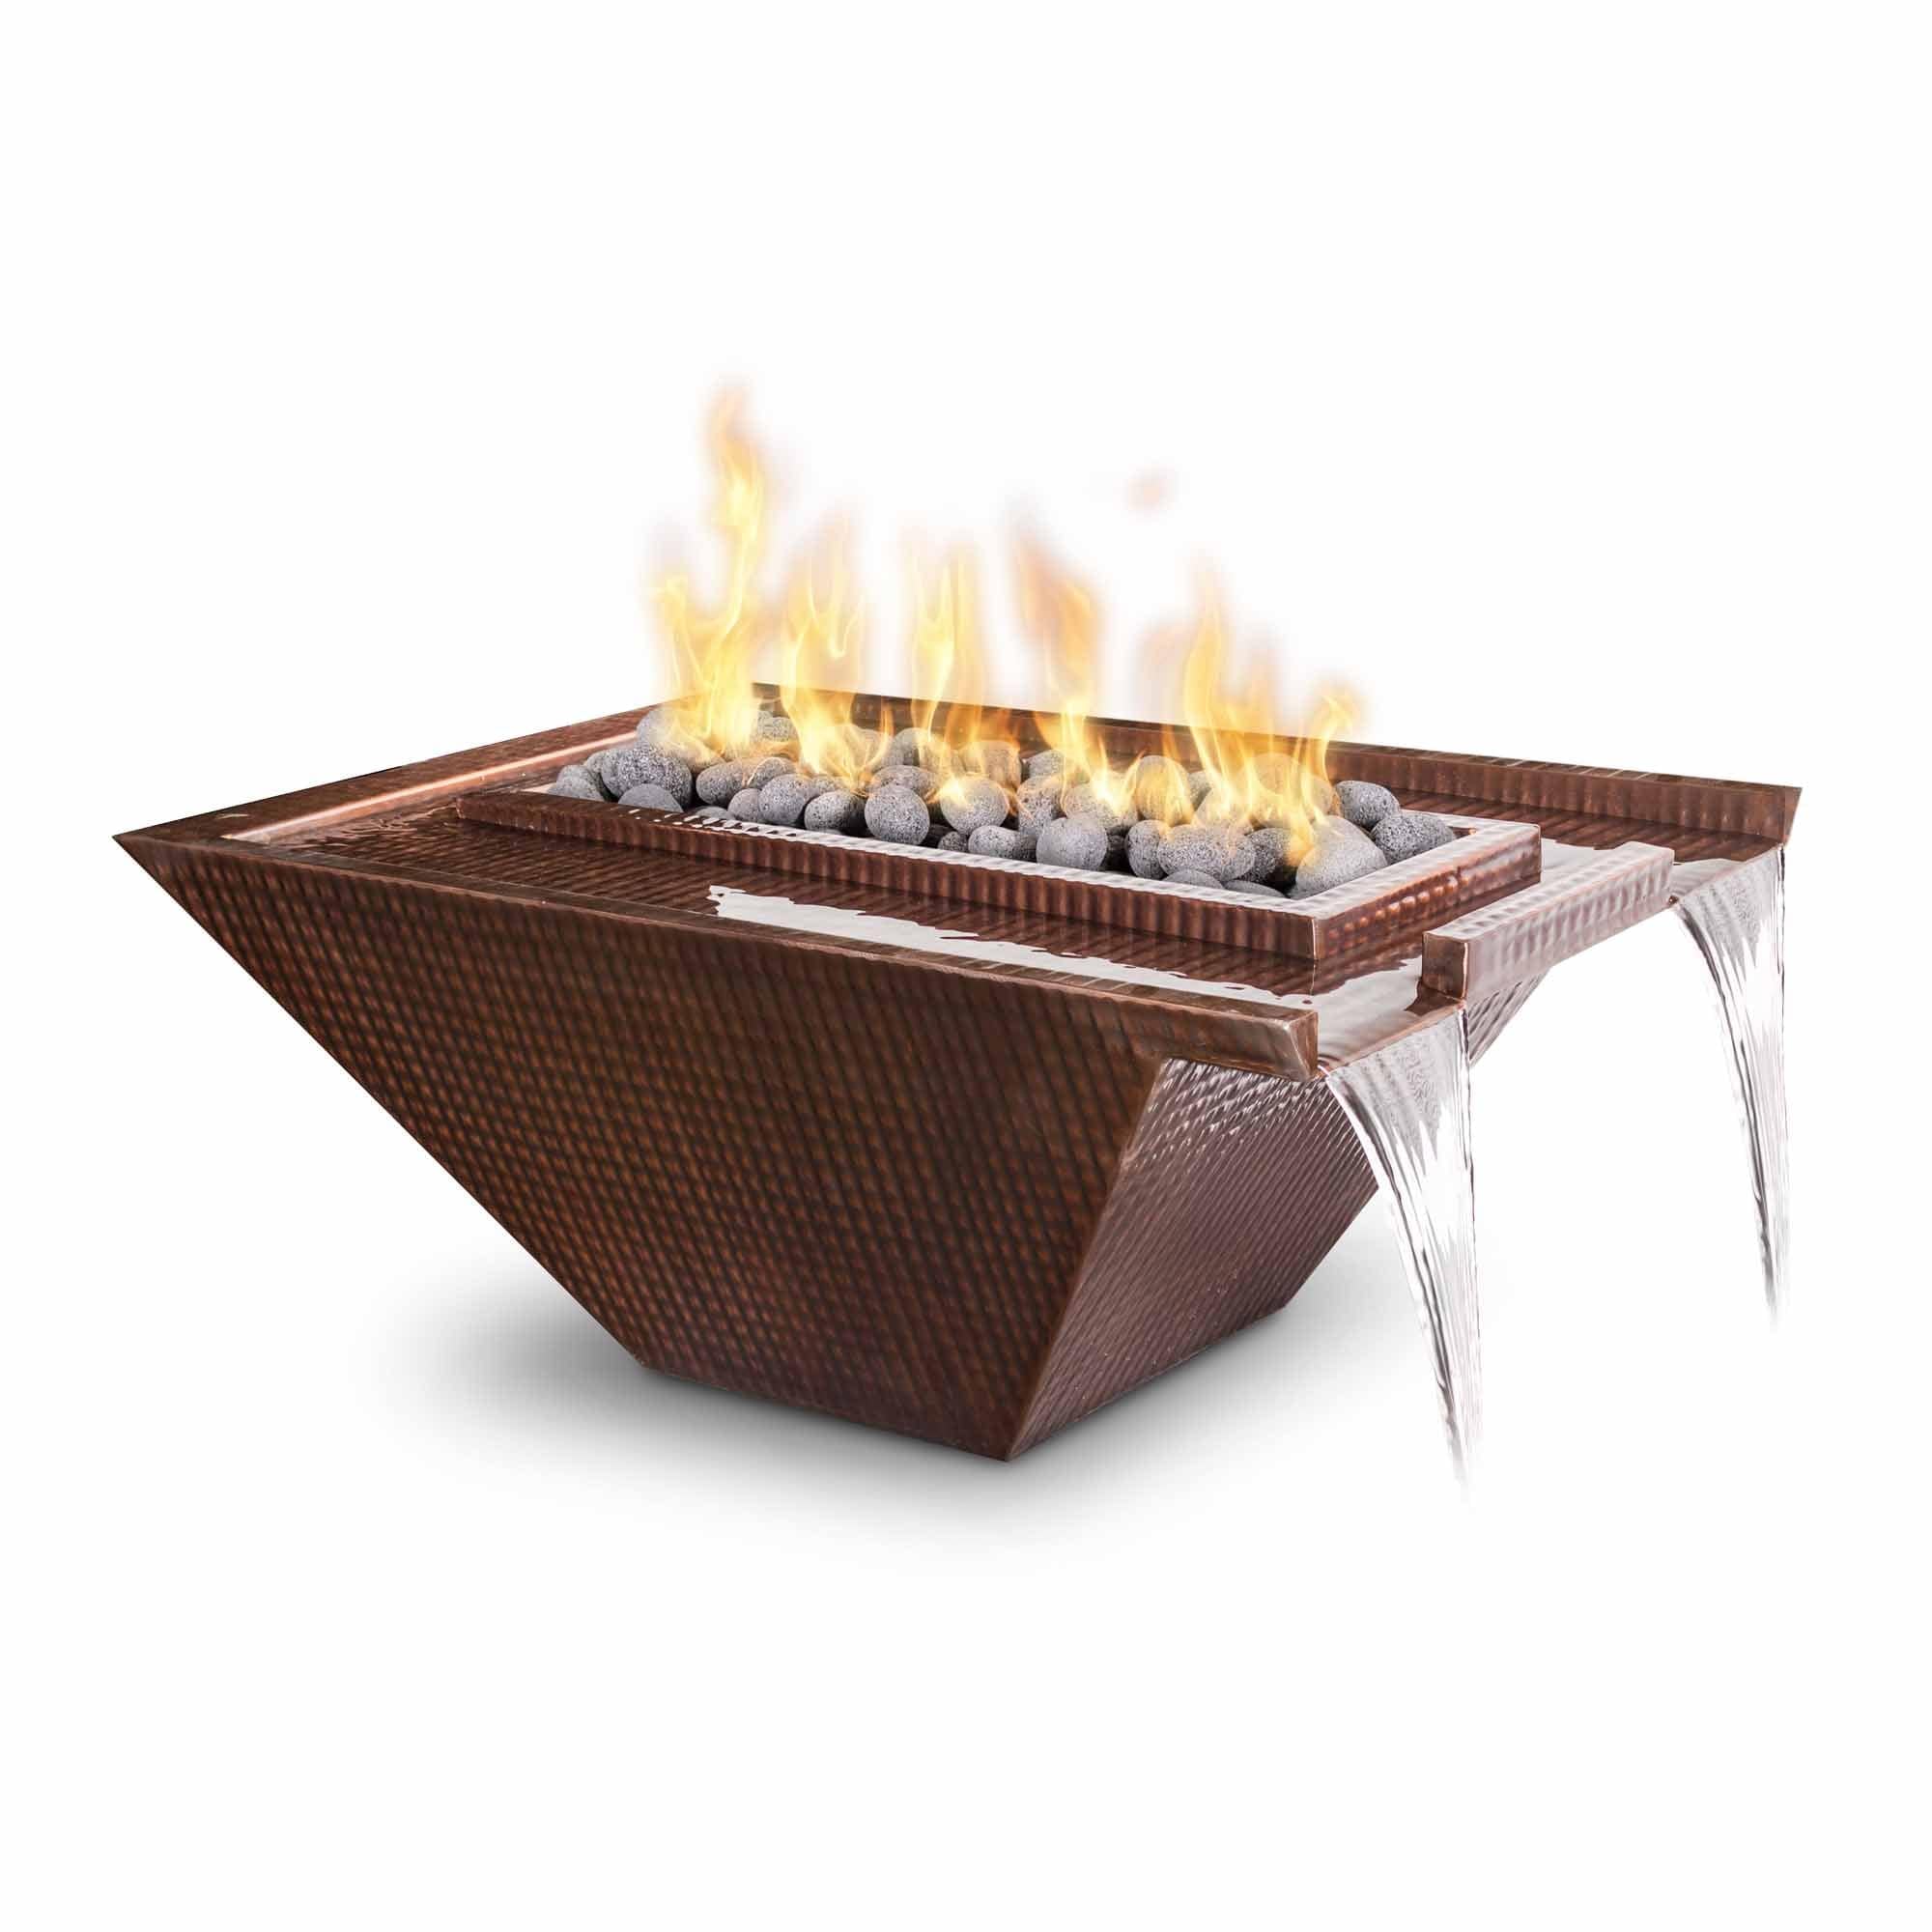 The Outdoor Plus Fire & Water Bowl 30" / Match Lit The Outdoor Plus Nile Fire & Water Bowl | Hammered Patina Copper OPT-30NLCPF